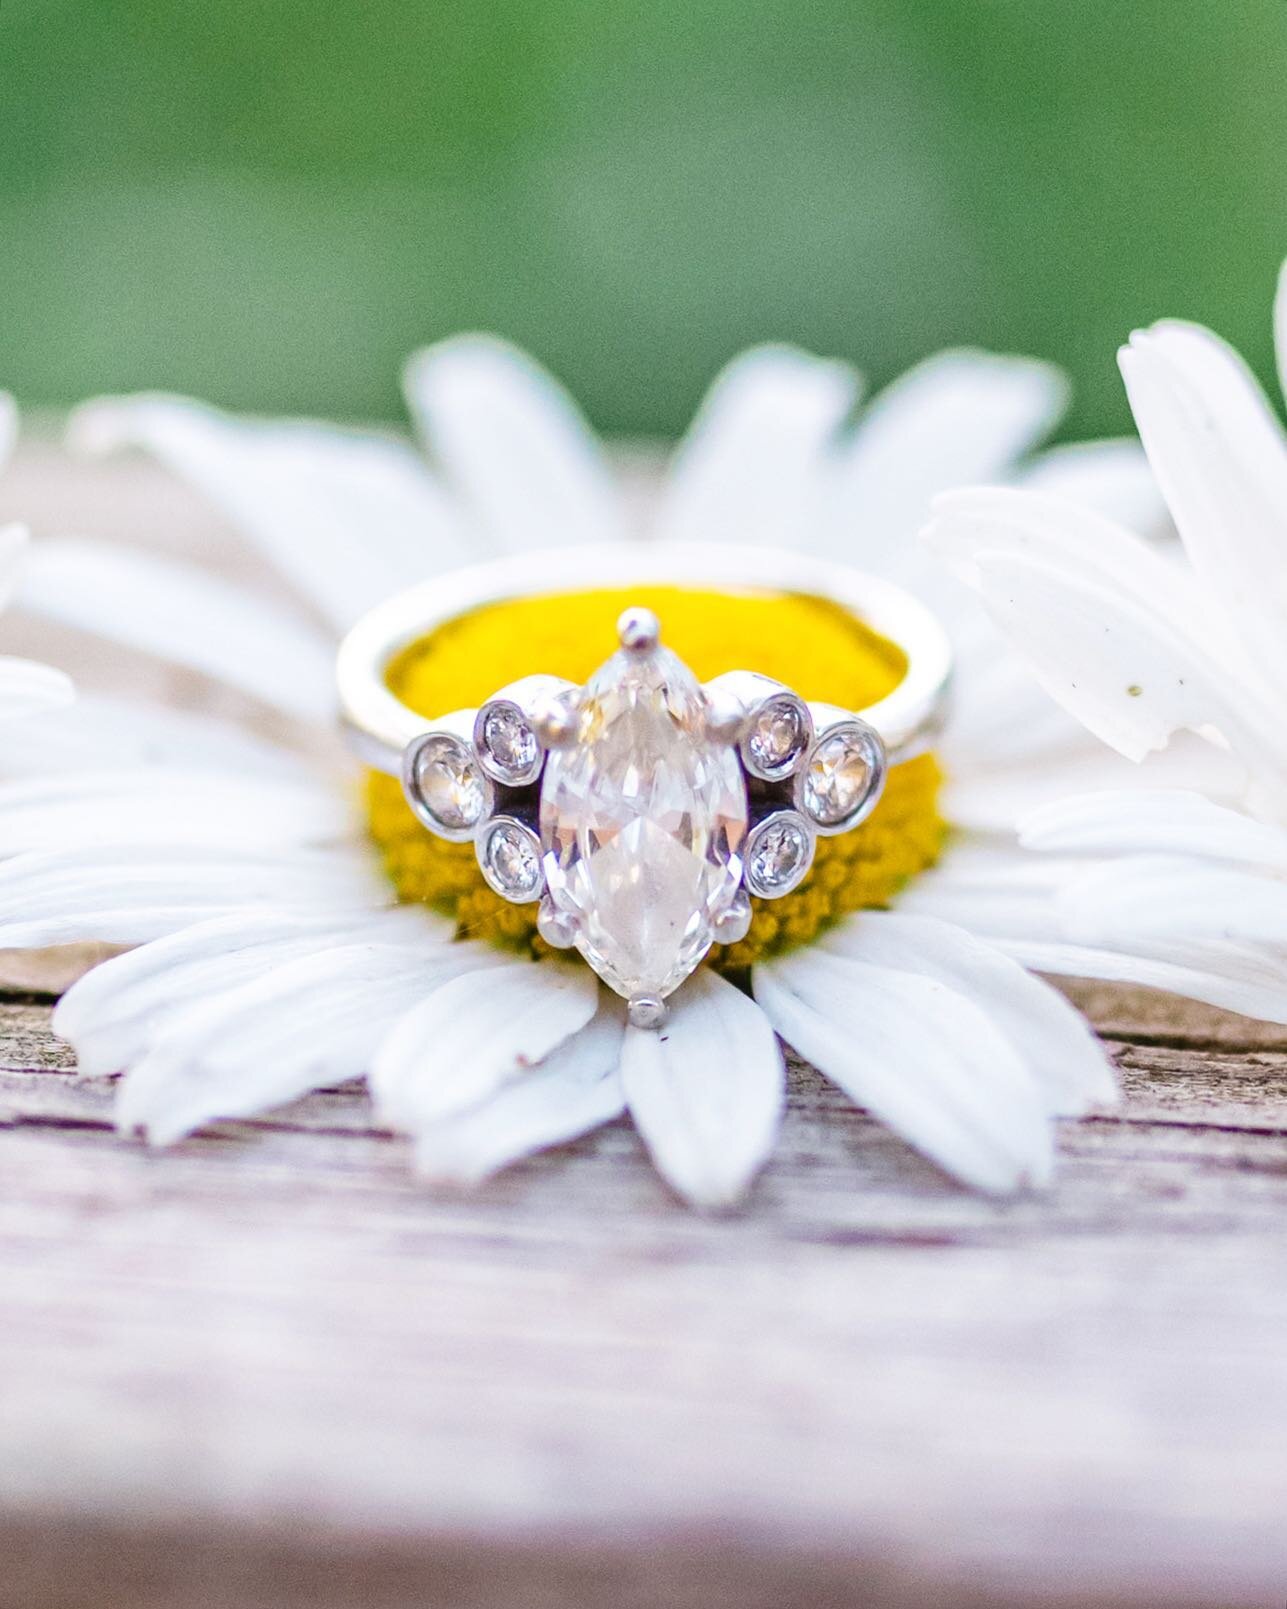 Just recovered from all the chigger bites I received while getting this ring shot two months ago. (Only partially kidding 😜) 
⠀⠀⠀⠀⠀⠀⠀⠀⠀
#morejoyphotography #morejoy #indianapolisphotographer #indyphotographer #indianaphotographer #indianapolisweddin